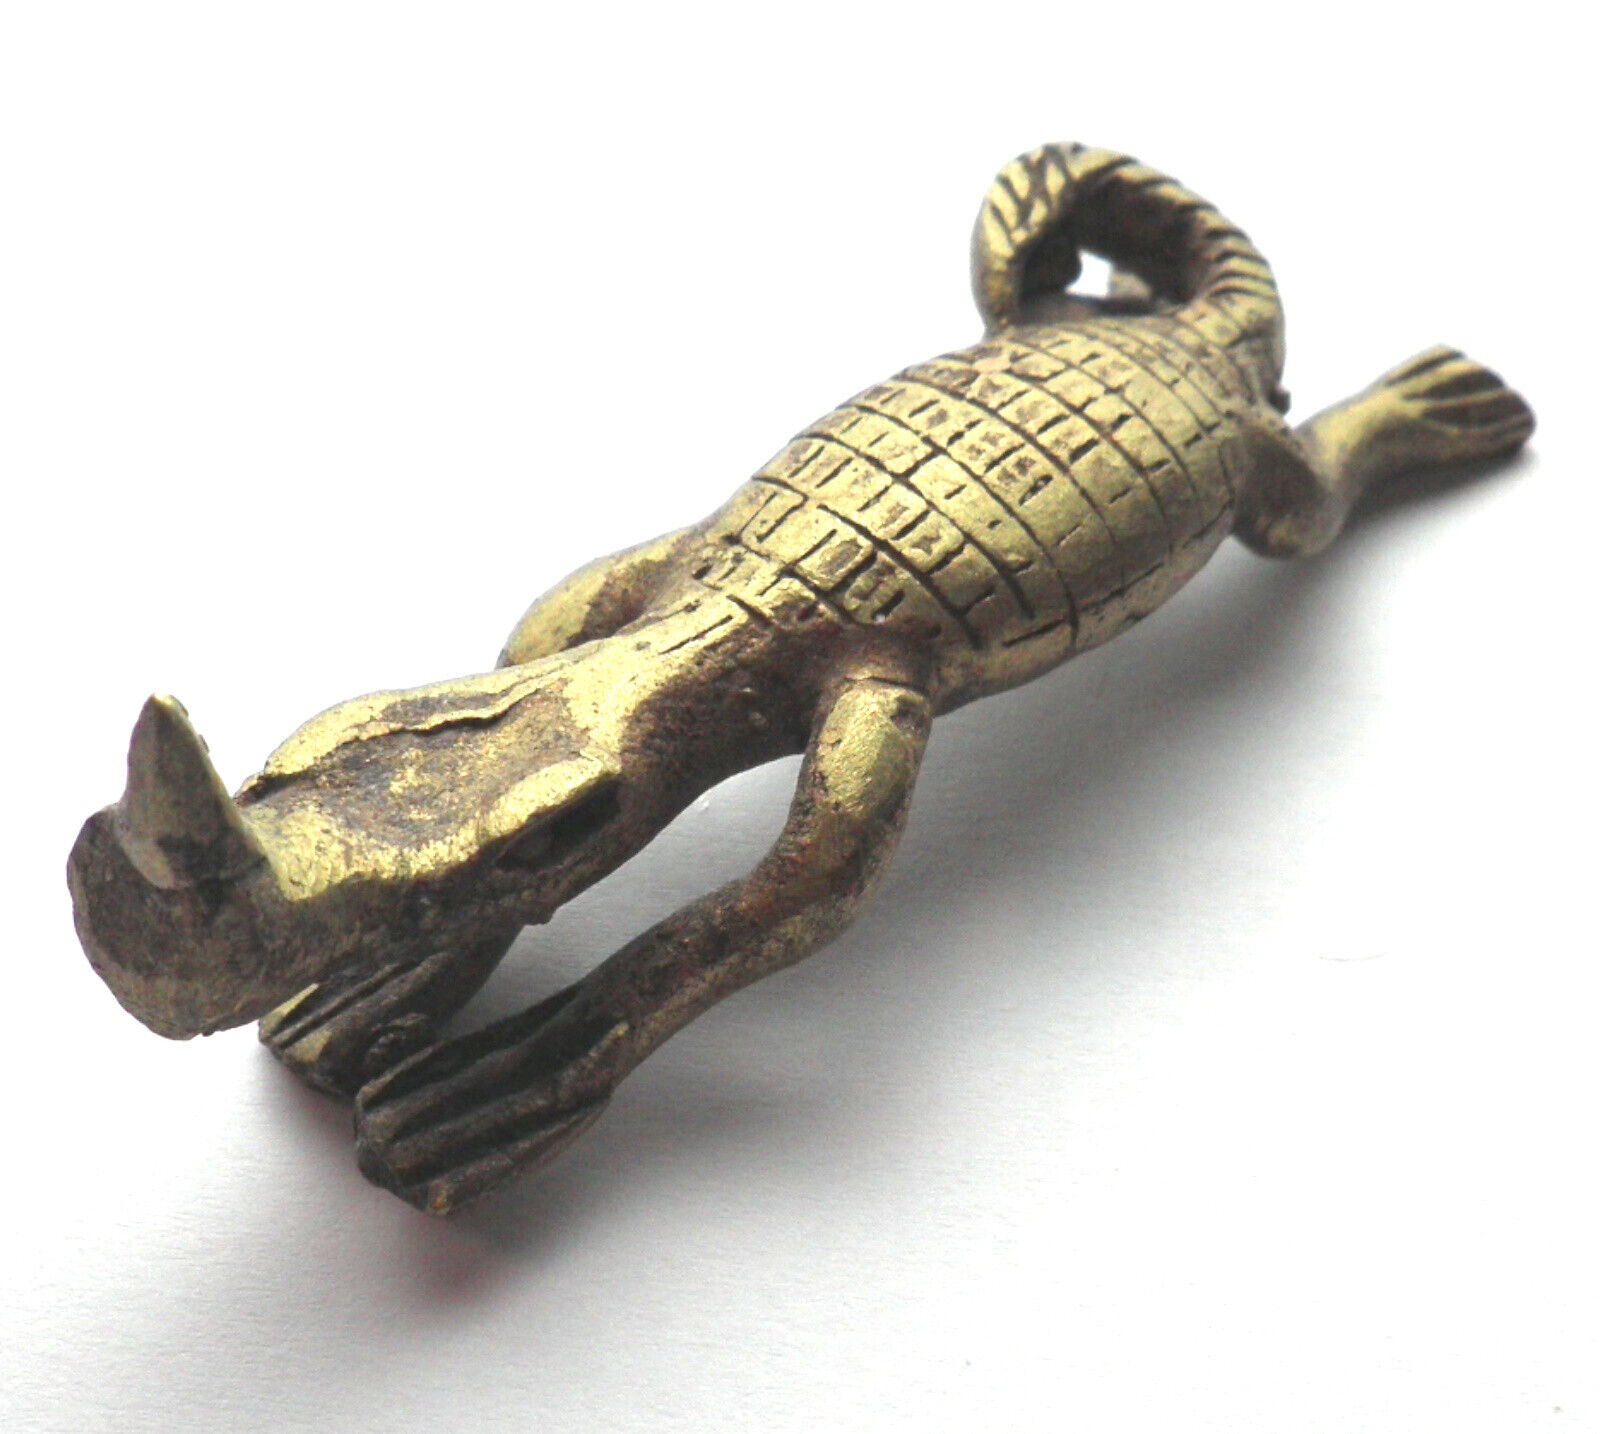 ANTIQUE AFRICAN ASHANTI AKAN HORNED CROCODILE GOLD WEIGHT 1700-1900 AD Brass .